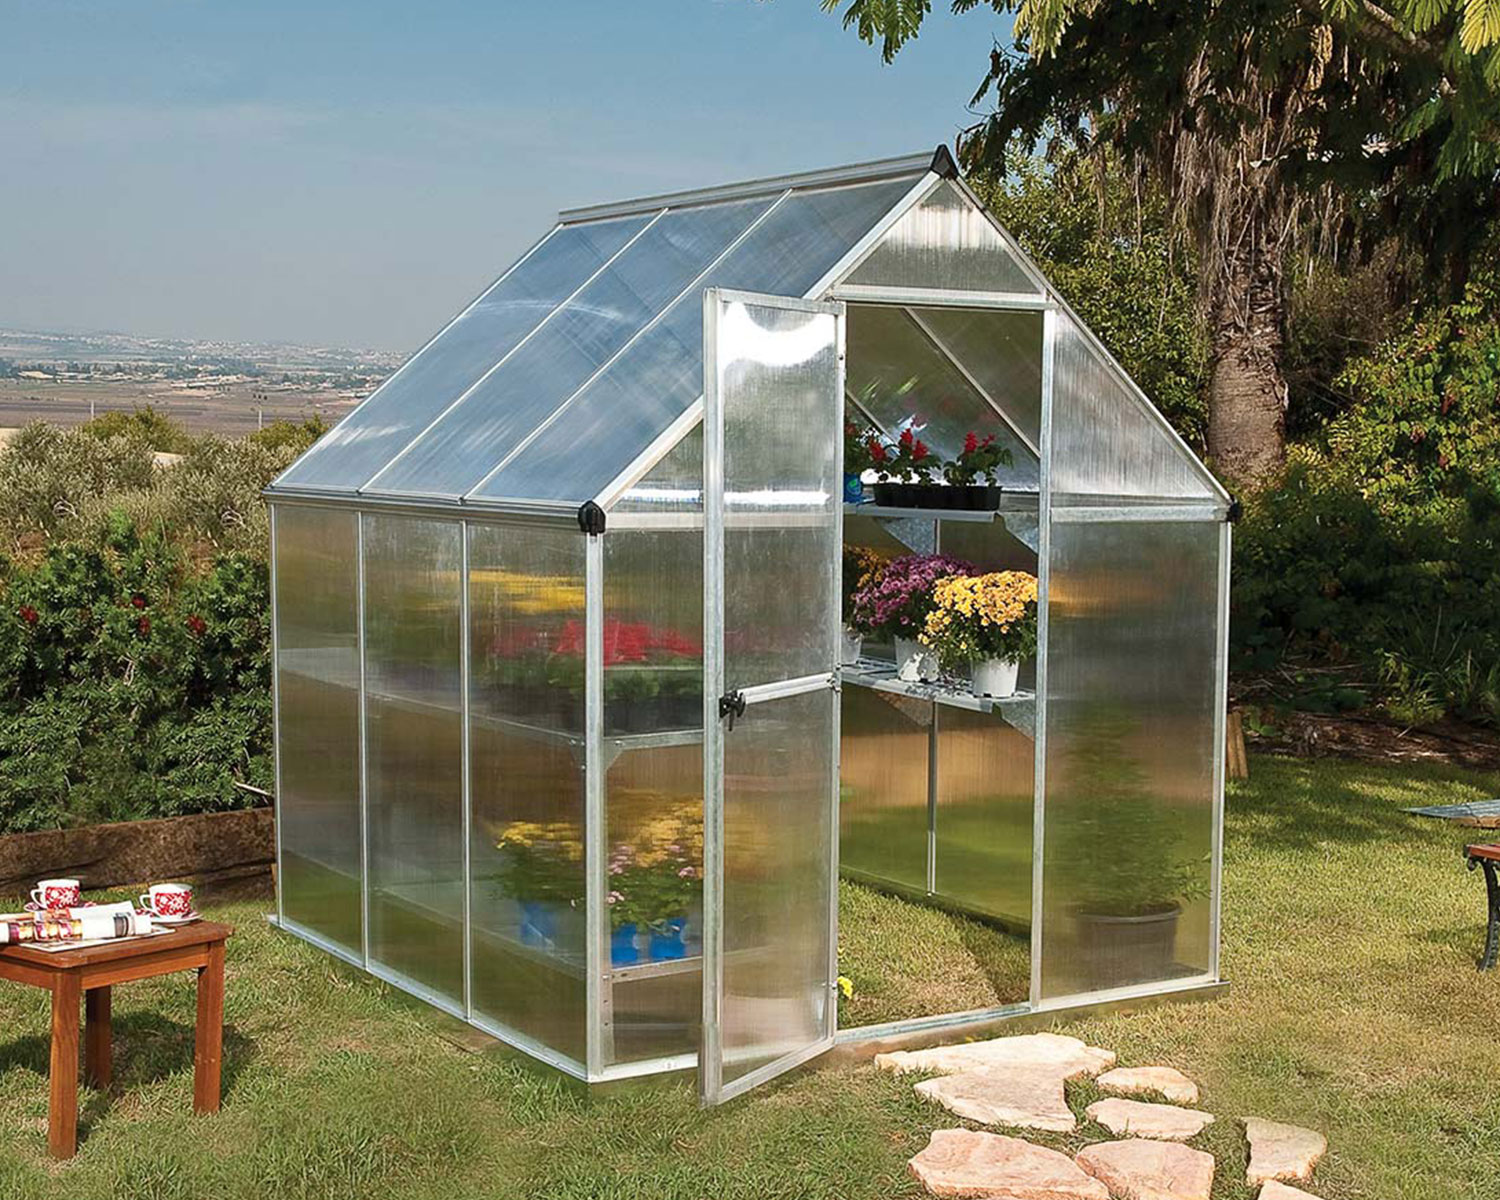 Mythos 6 ft. x 6 ft. Greenhouse Silver Structure &amp; Twinwall Panels outside on a lawn